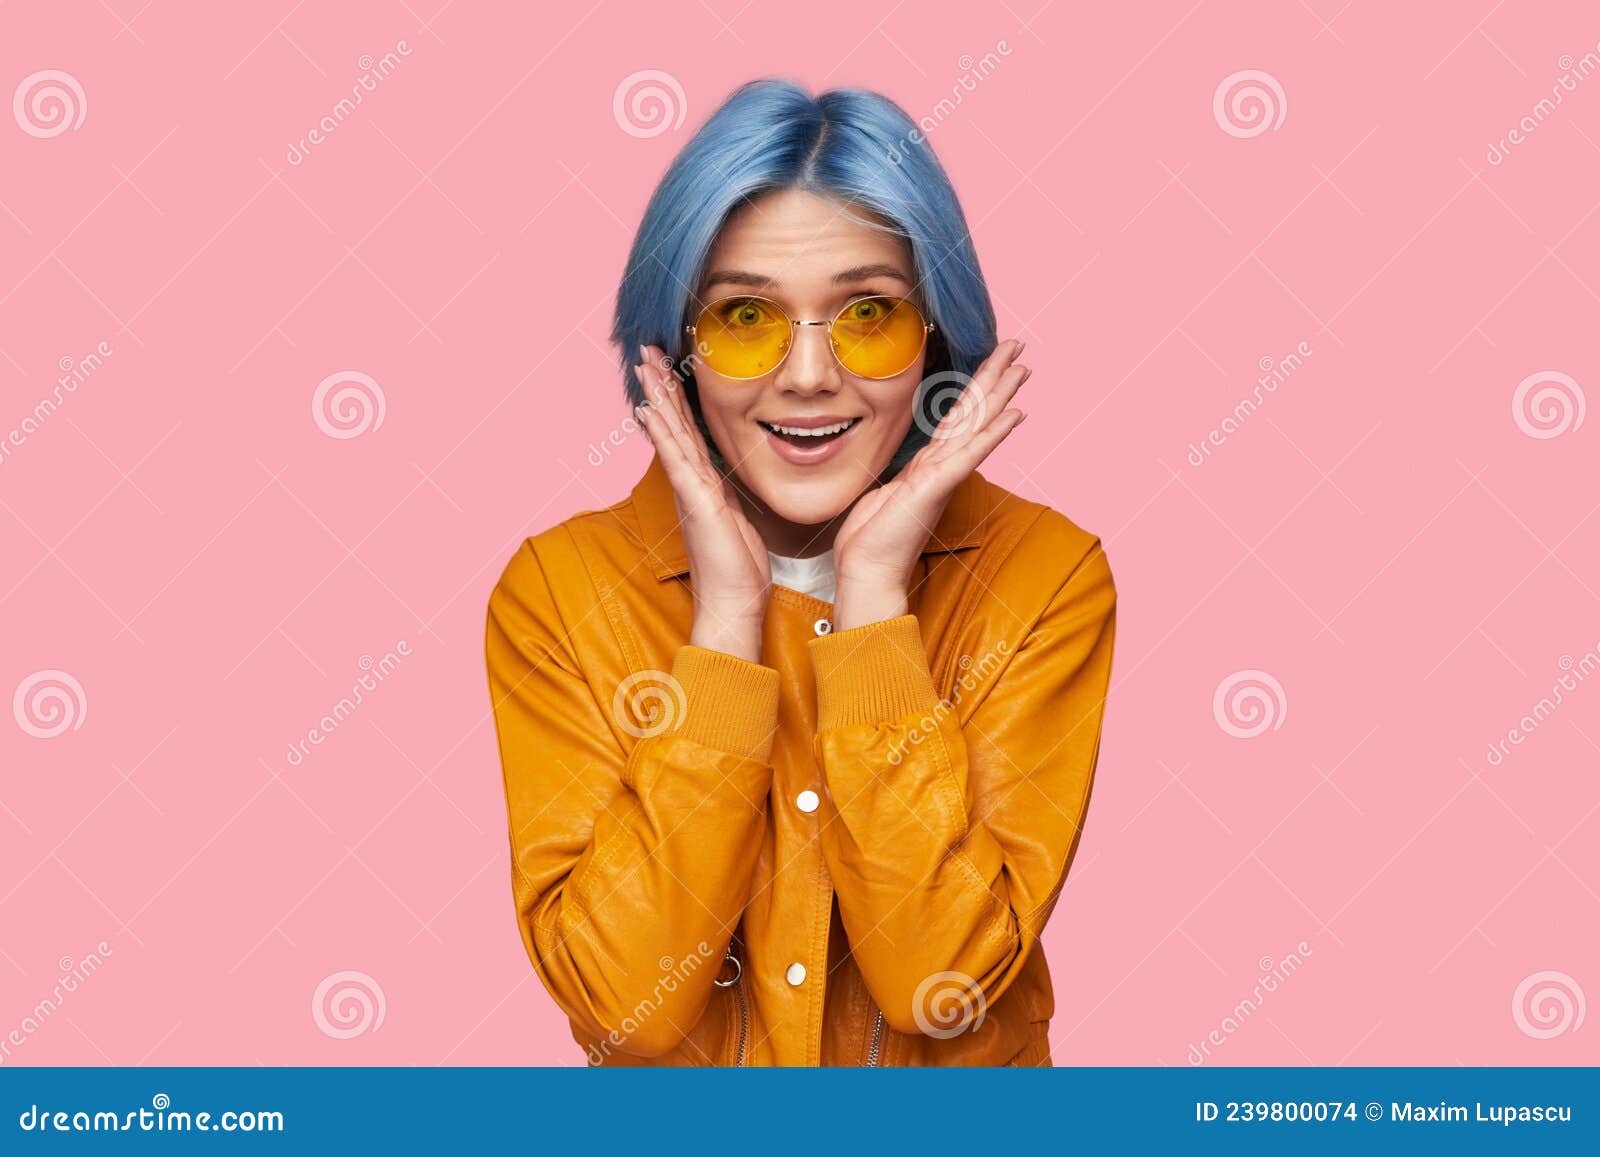 Blue hair and fat hipster - wide 7